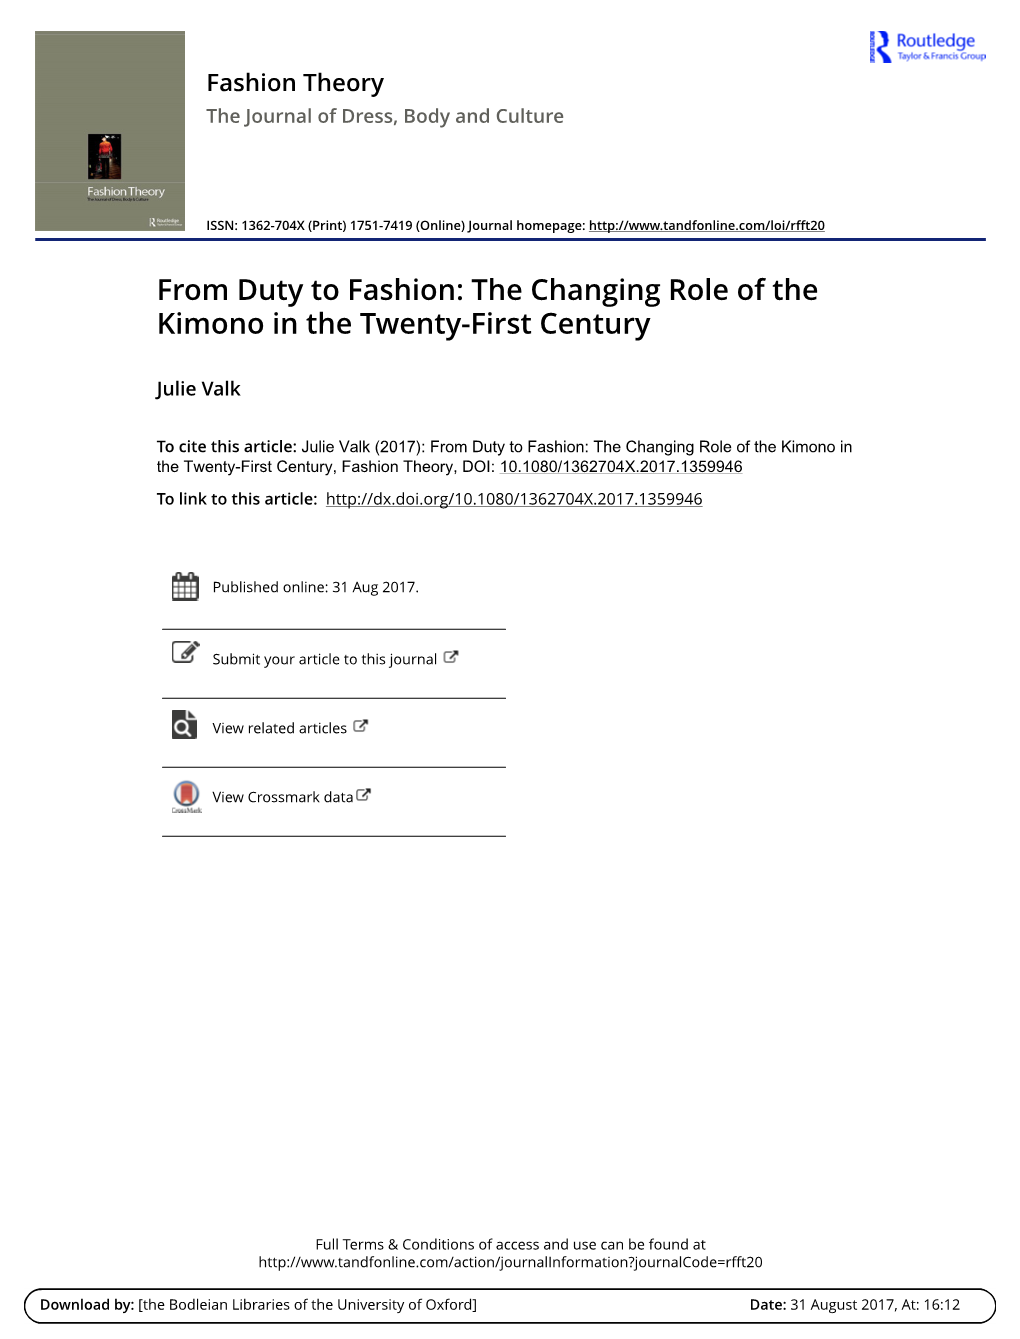 The Changing Role of the Kimono in the Twenty-First Century